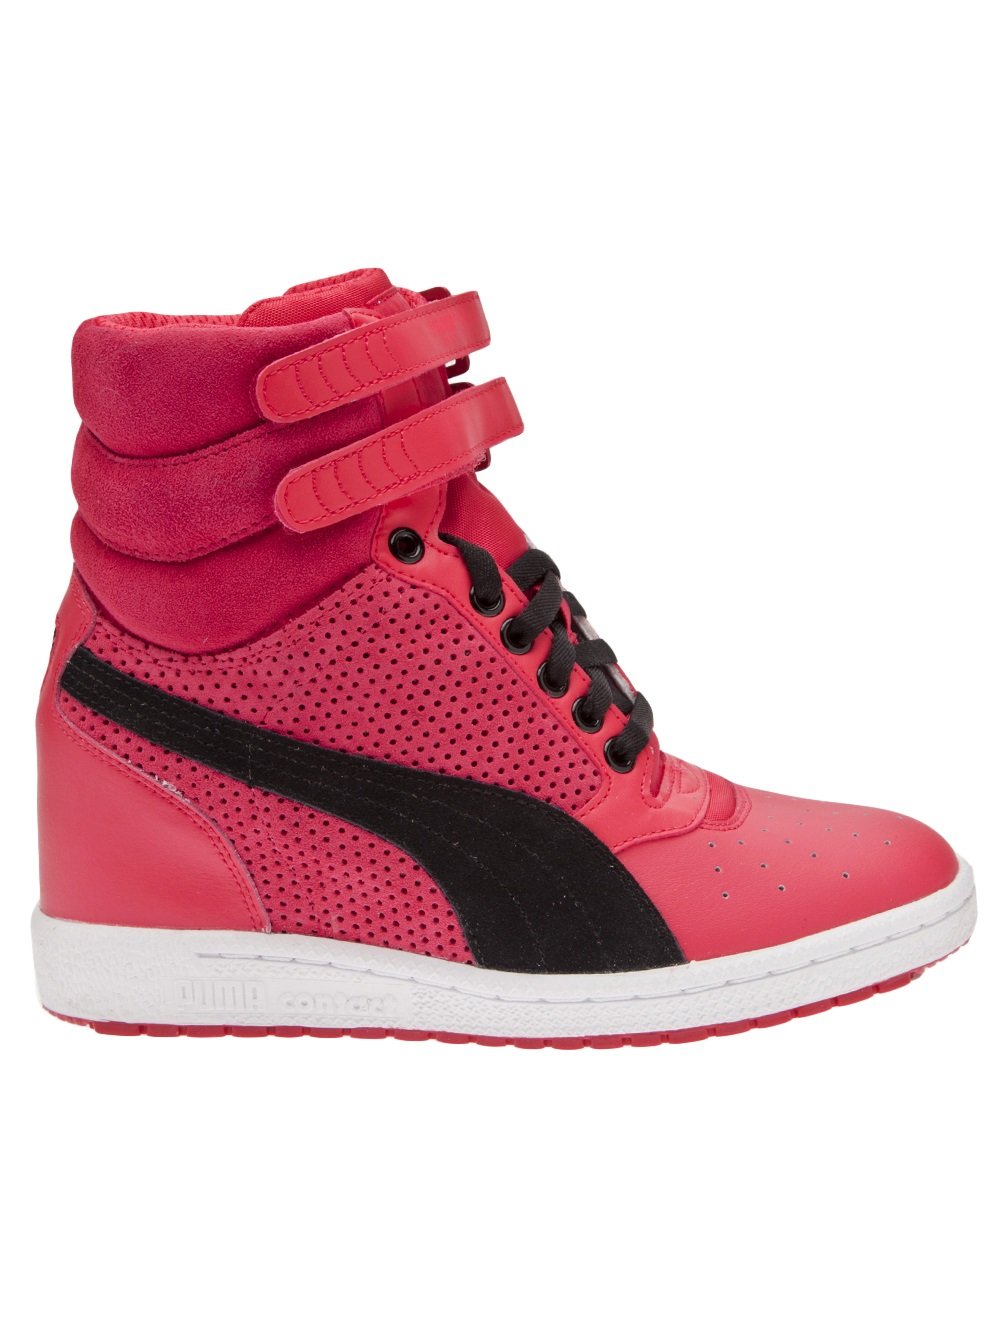 PUMA High Top Wedge in Pink - Lyst